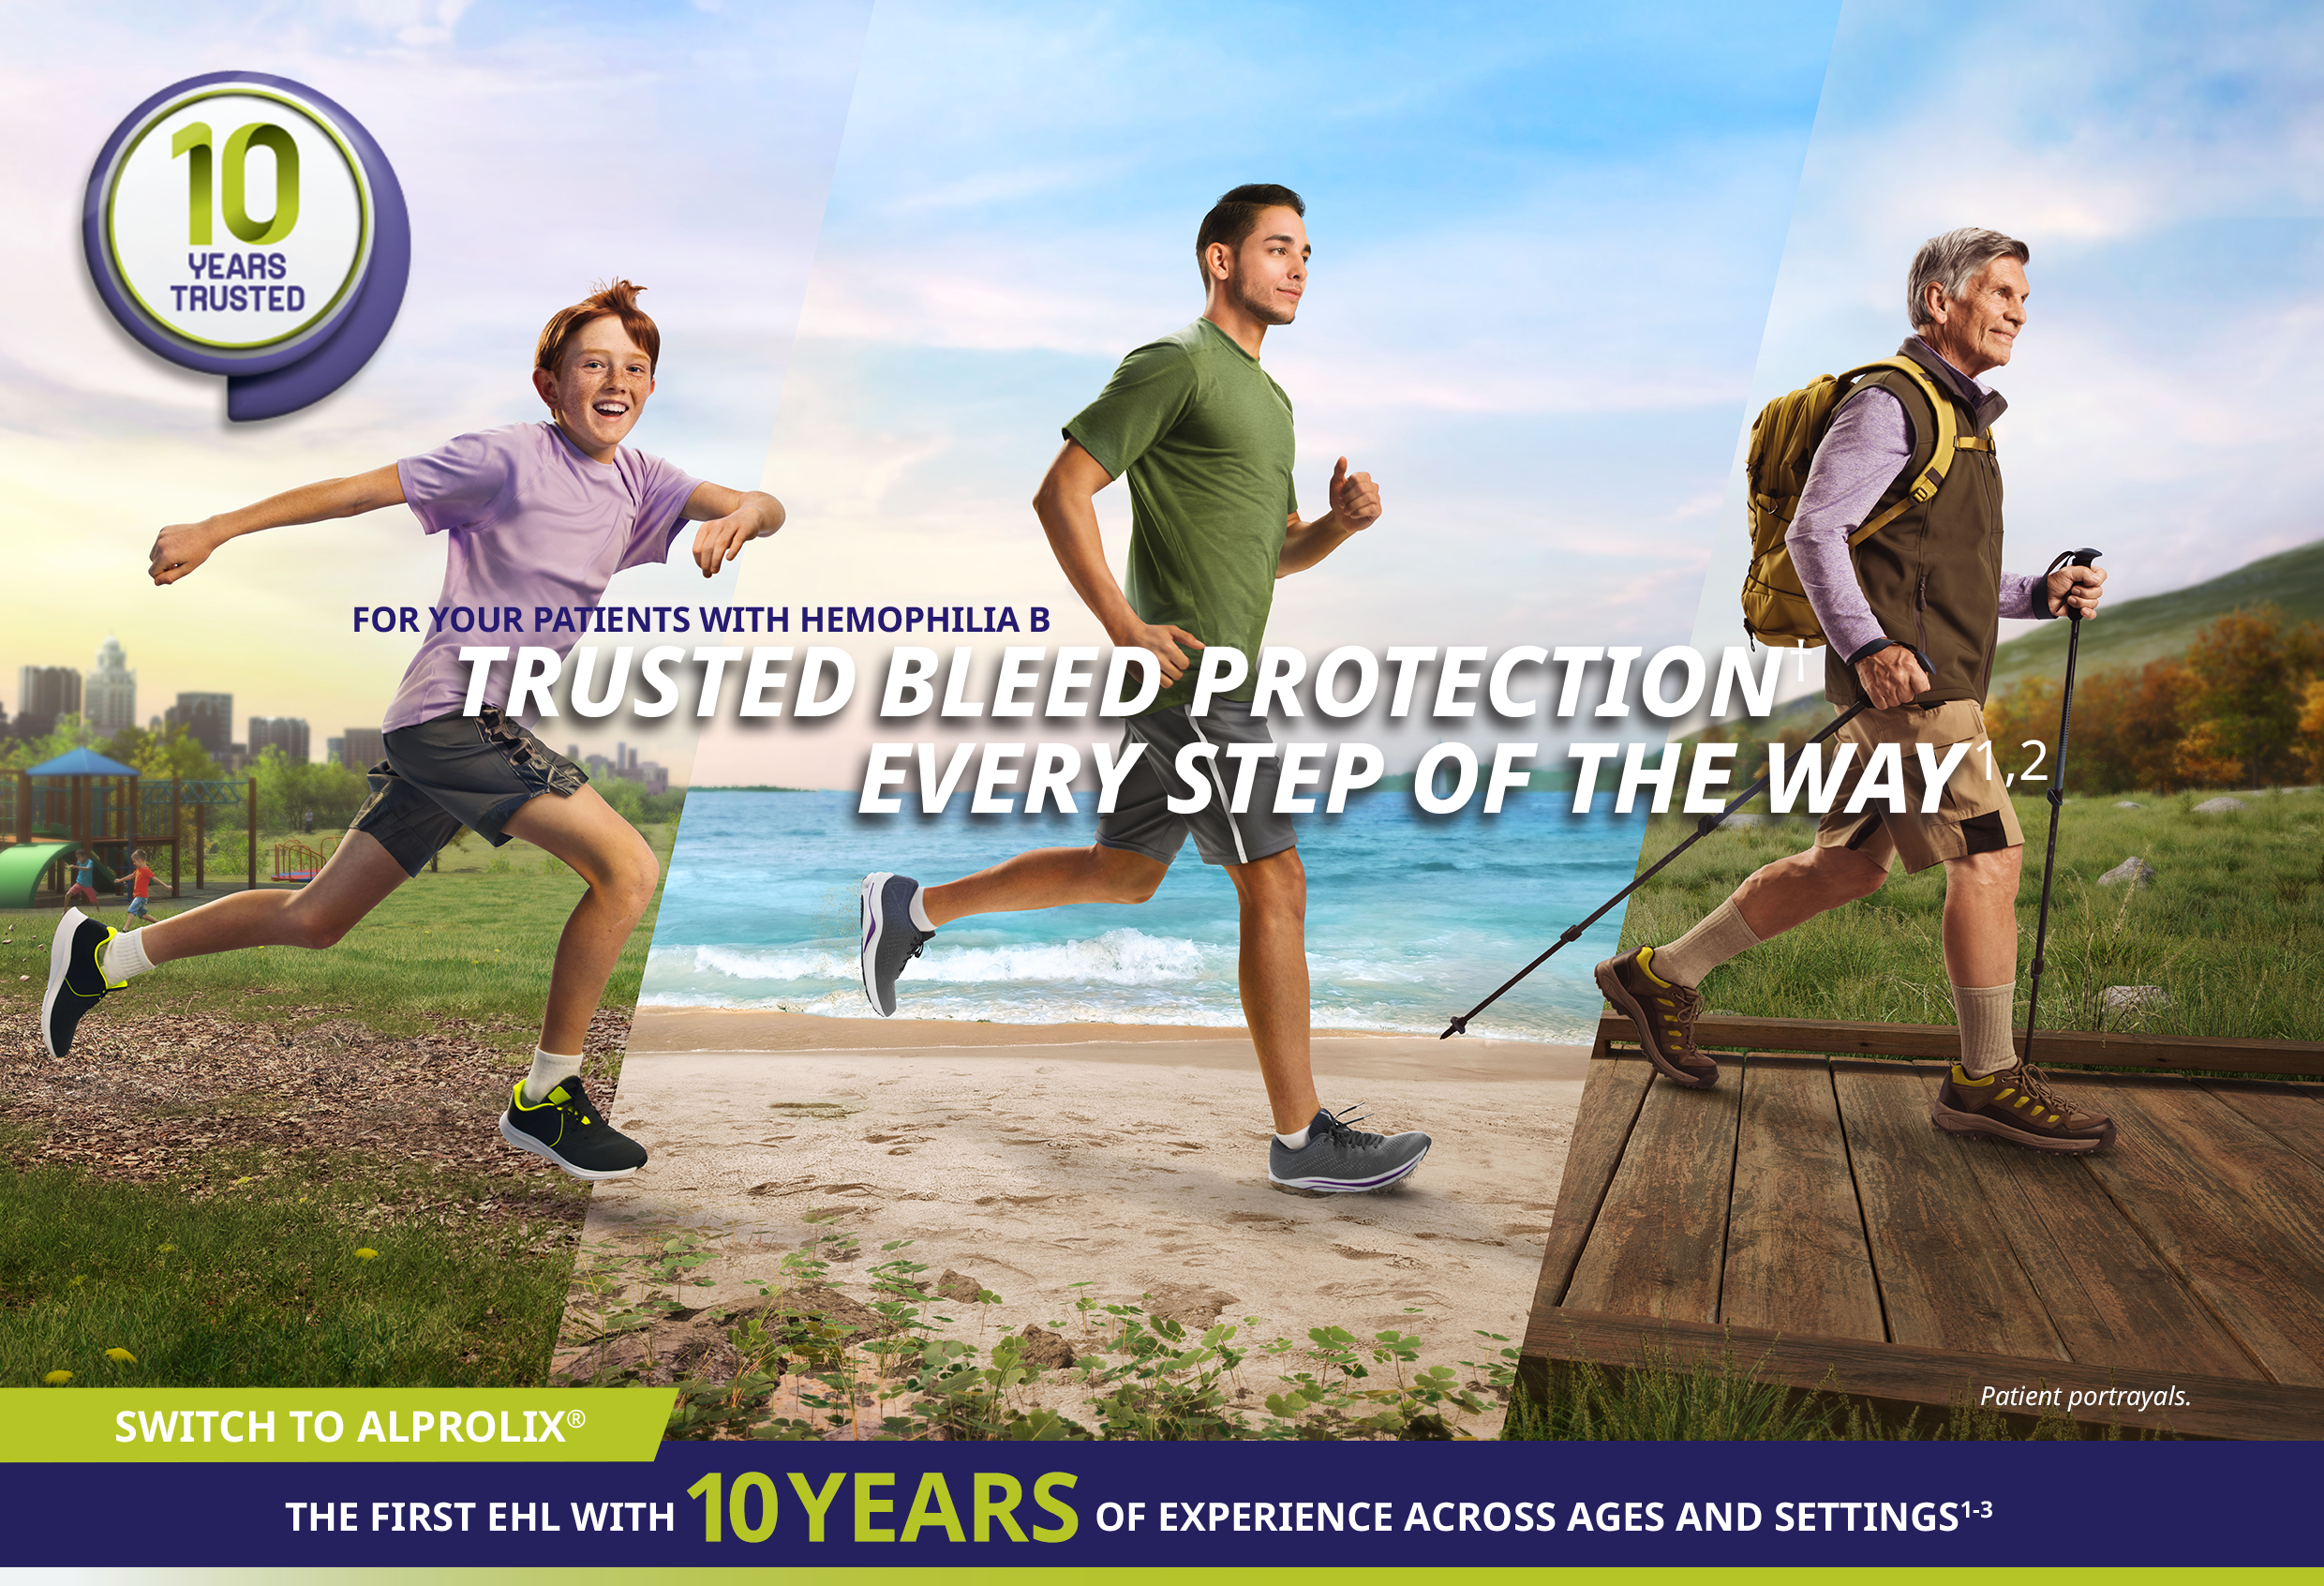 For your Patients With Hemophilia B - Trusted Protection Every Step of the Way SWITCH TO ALPROLIX - THE FIRST EHL WITH NEARLY 10 YRS OF EXPERIENCE ACROSS AGES AND SETTINGS 10 Years Trusted